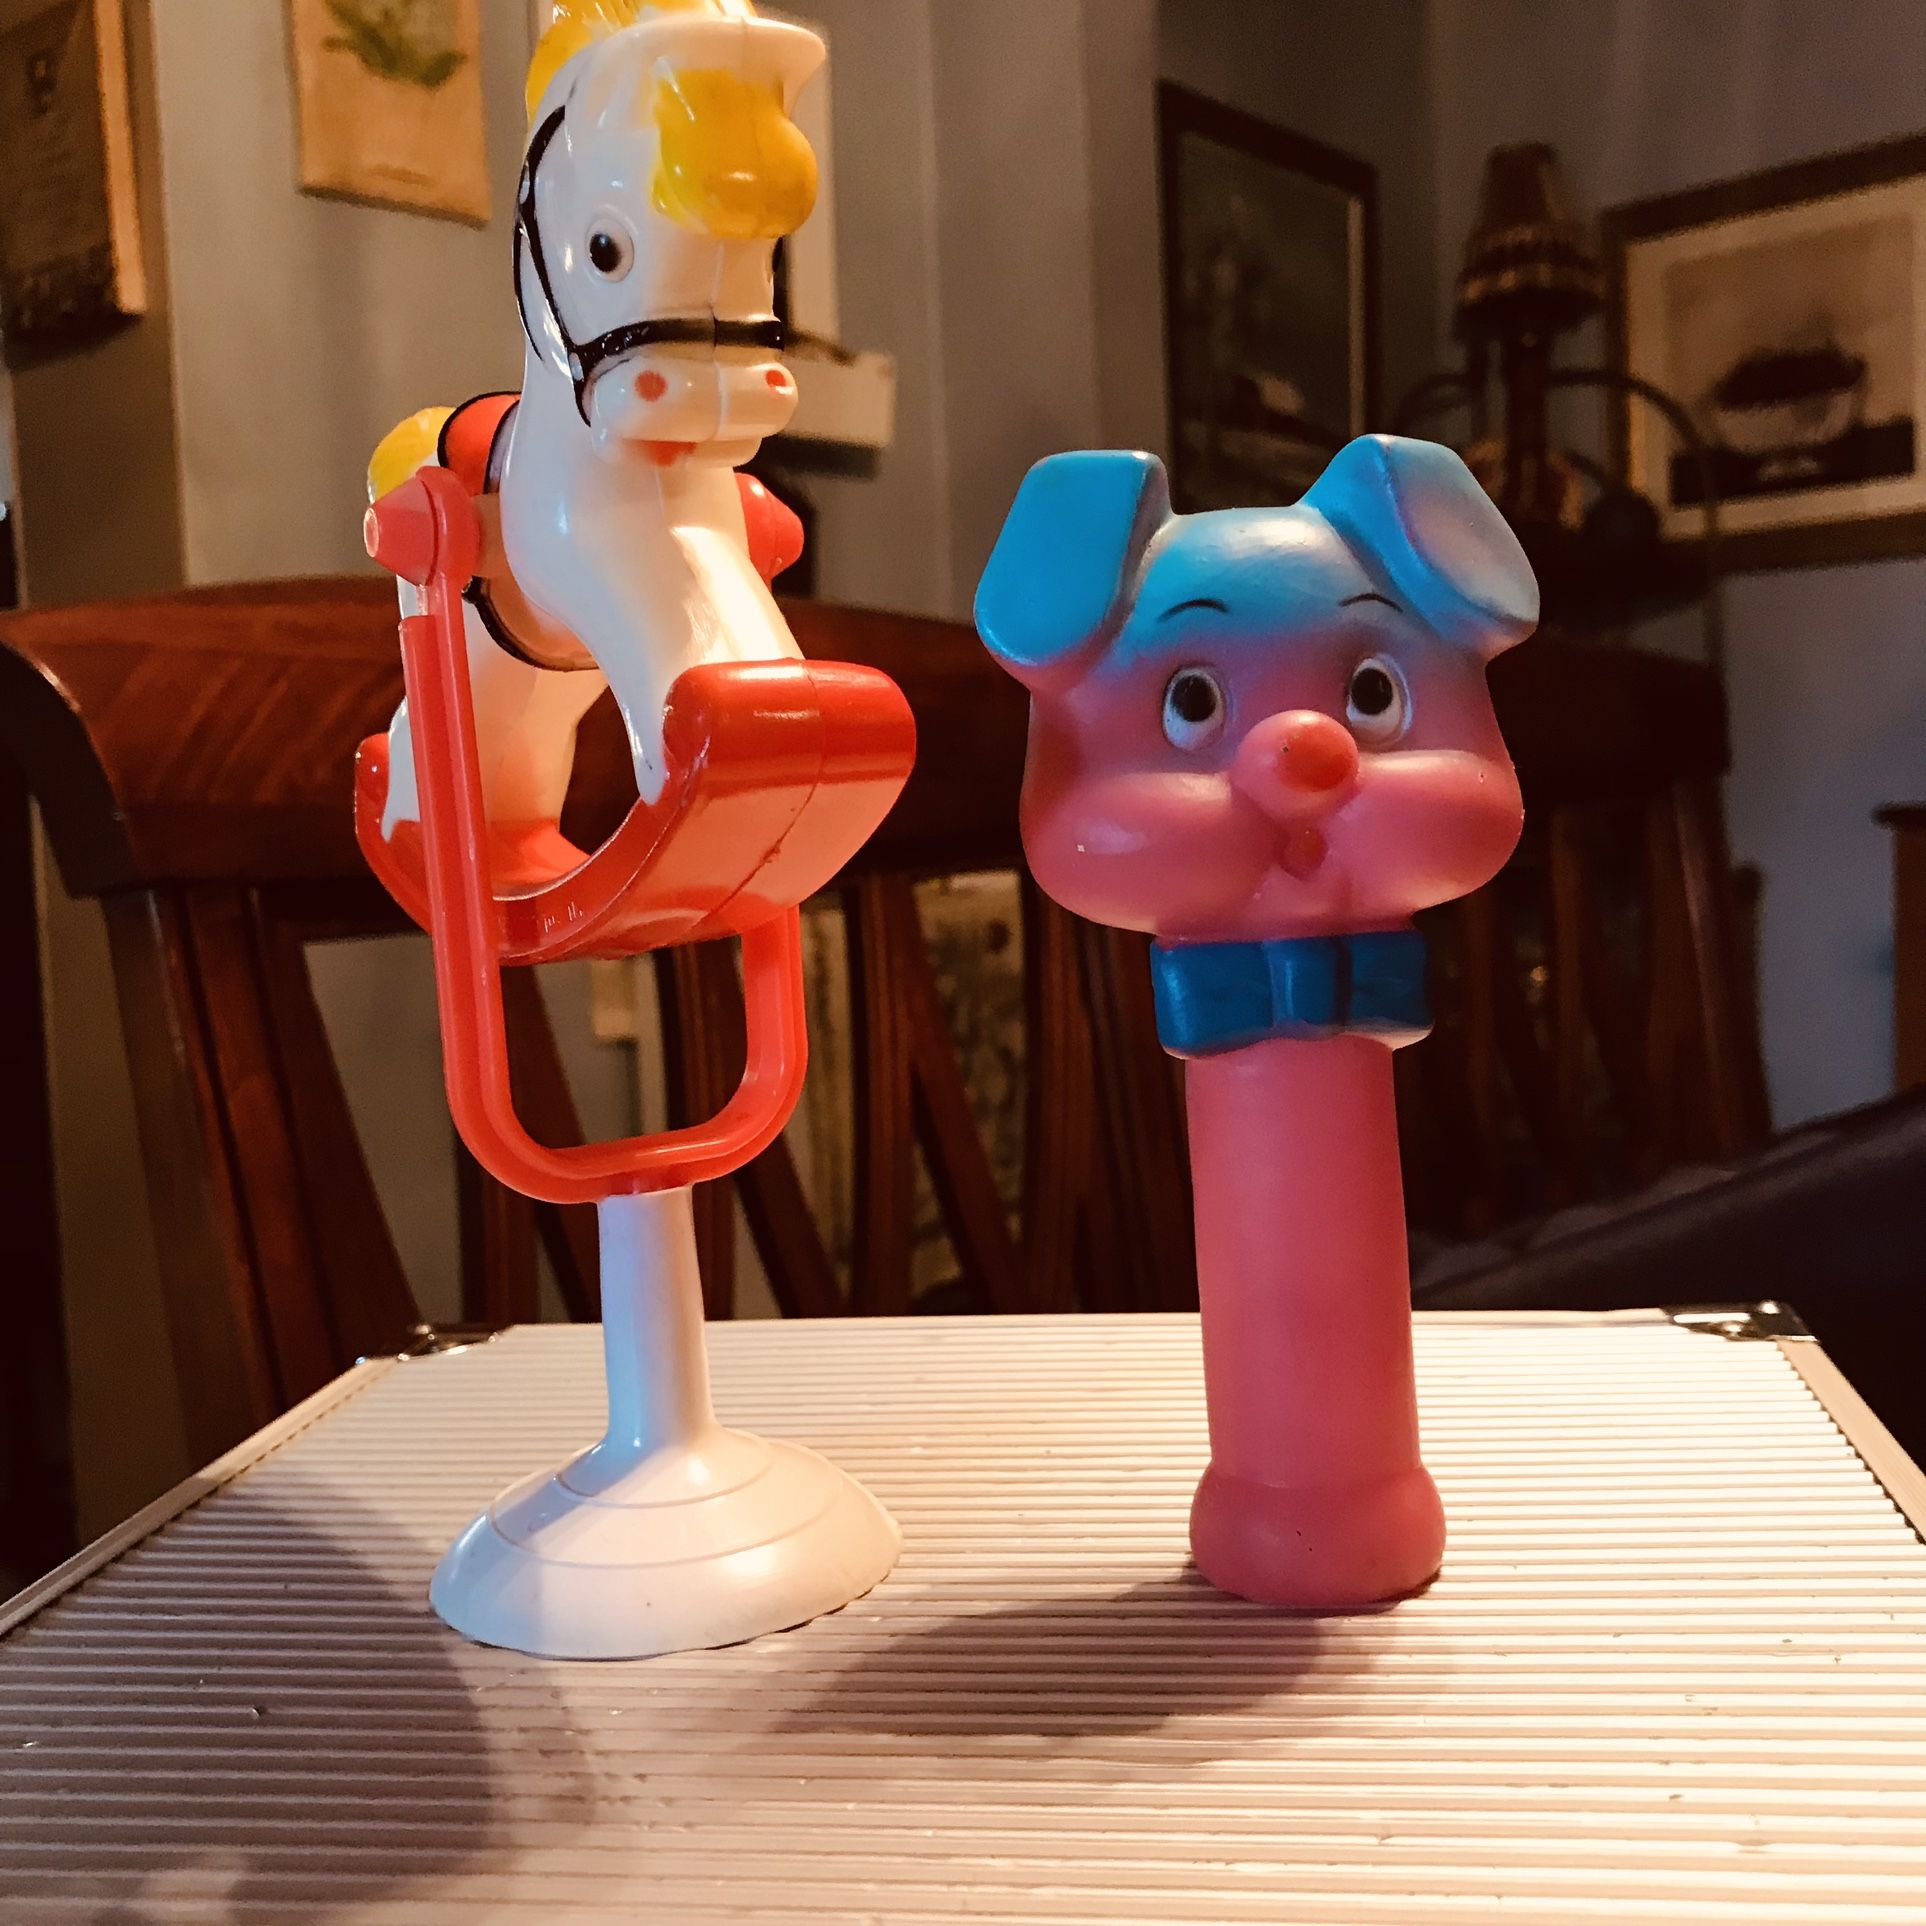 2 Vintage Baby Toys, The Rocking horse Is A Stahlwood Horse Rattle and Pig Squeaky Toy Made In Taiwan 